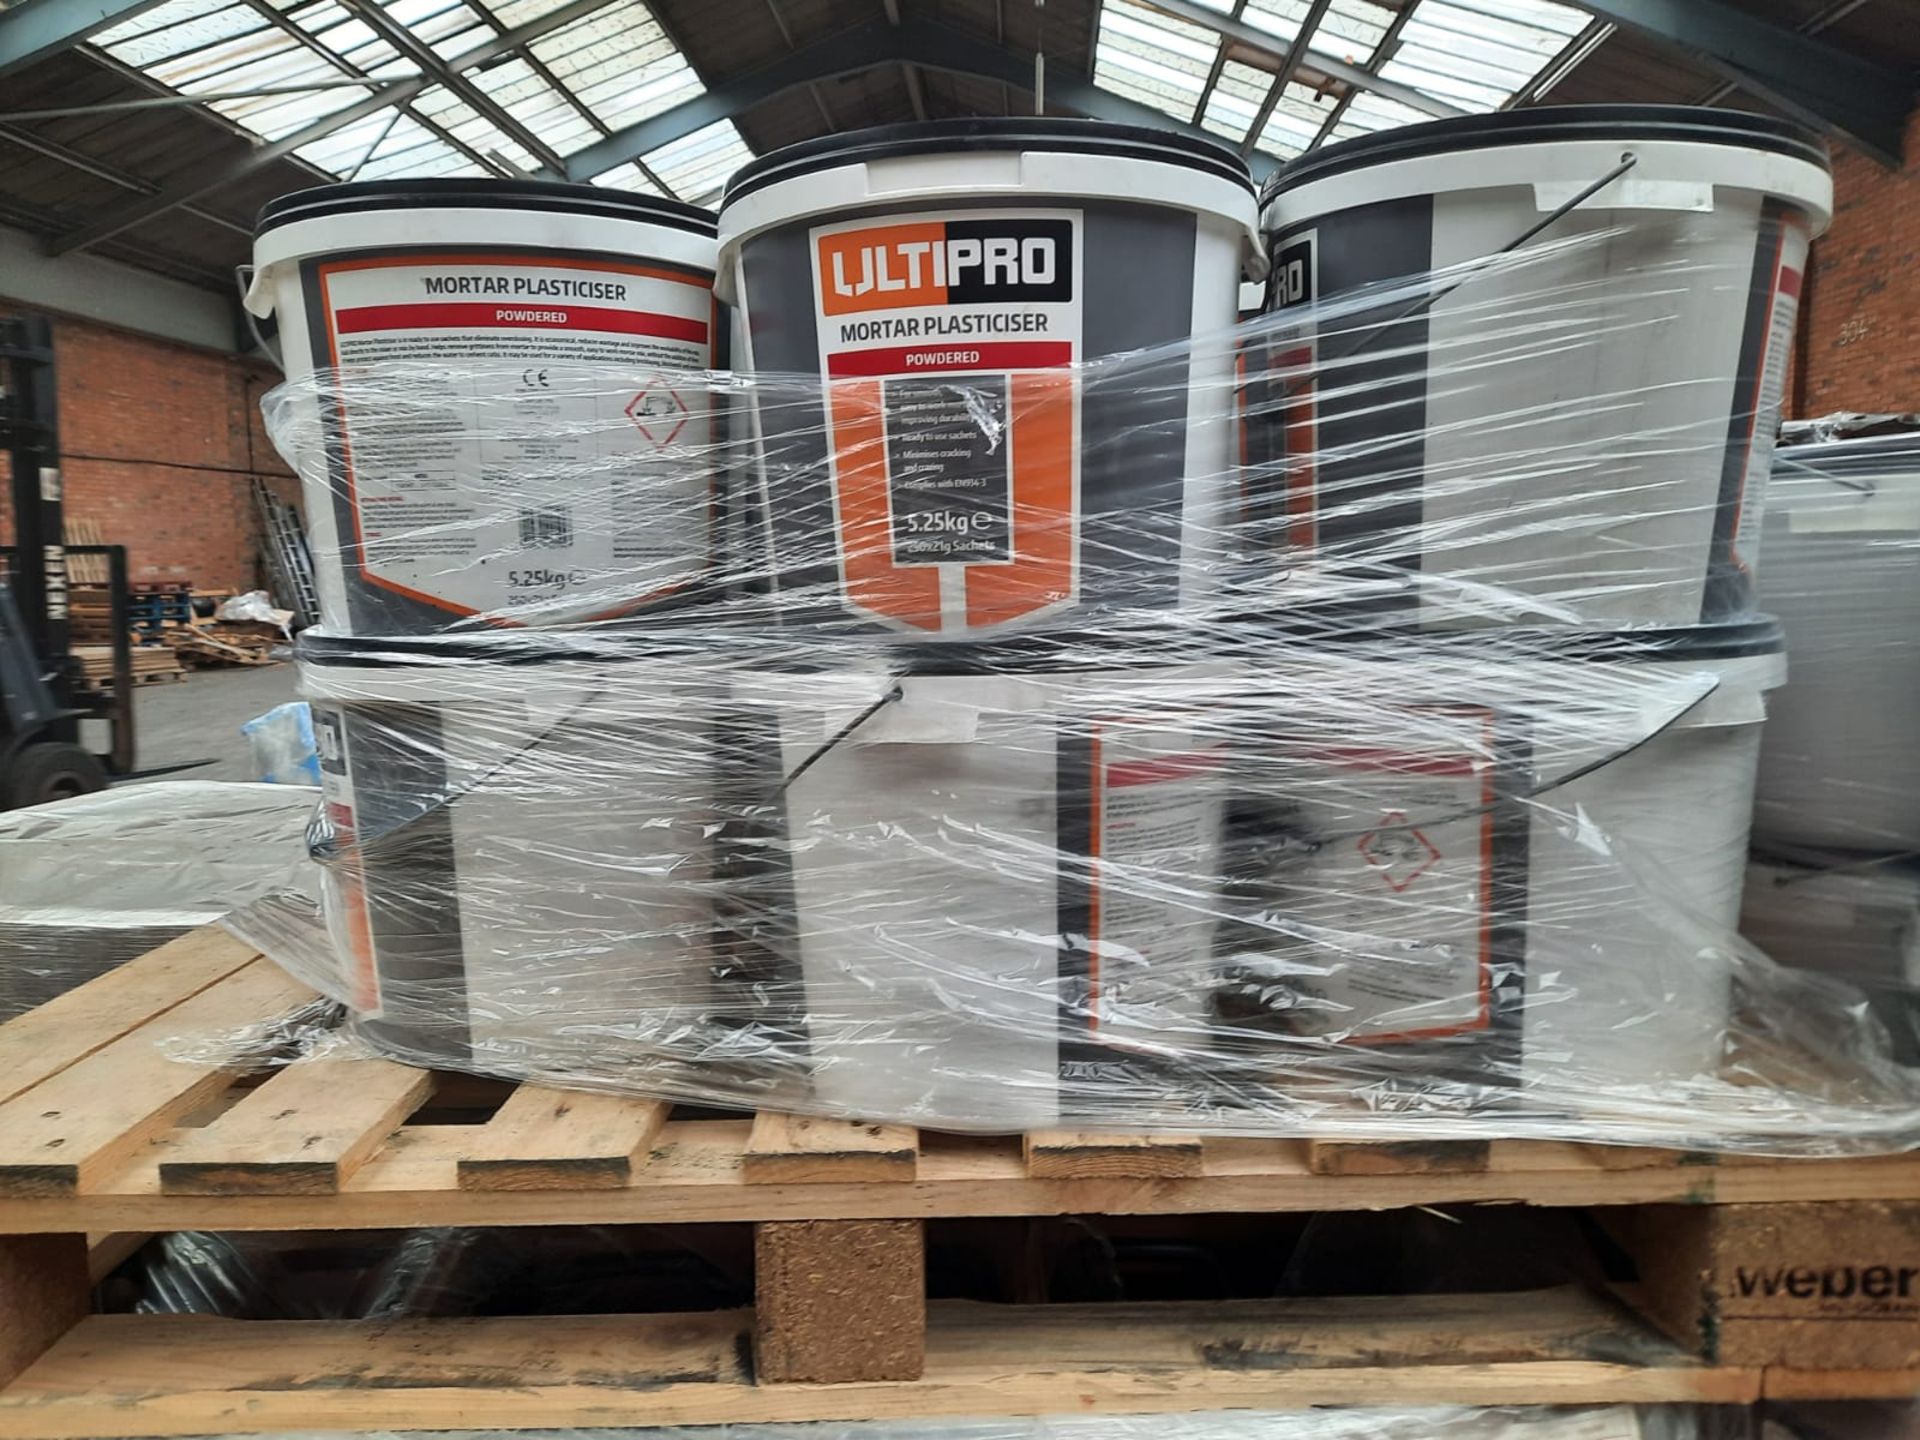 PALLET OF 50 NEW 5.25KG TUBS OF ULTIPRO MORTAR PLASTICISER - POWDERED - FOR SMOOTH, EASY TO WORK - Image 2 of 3